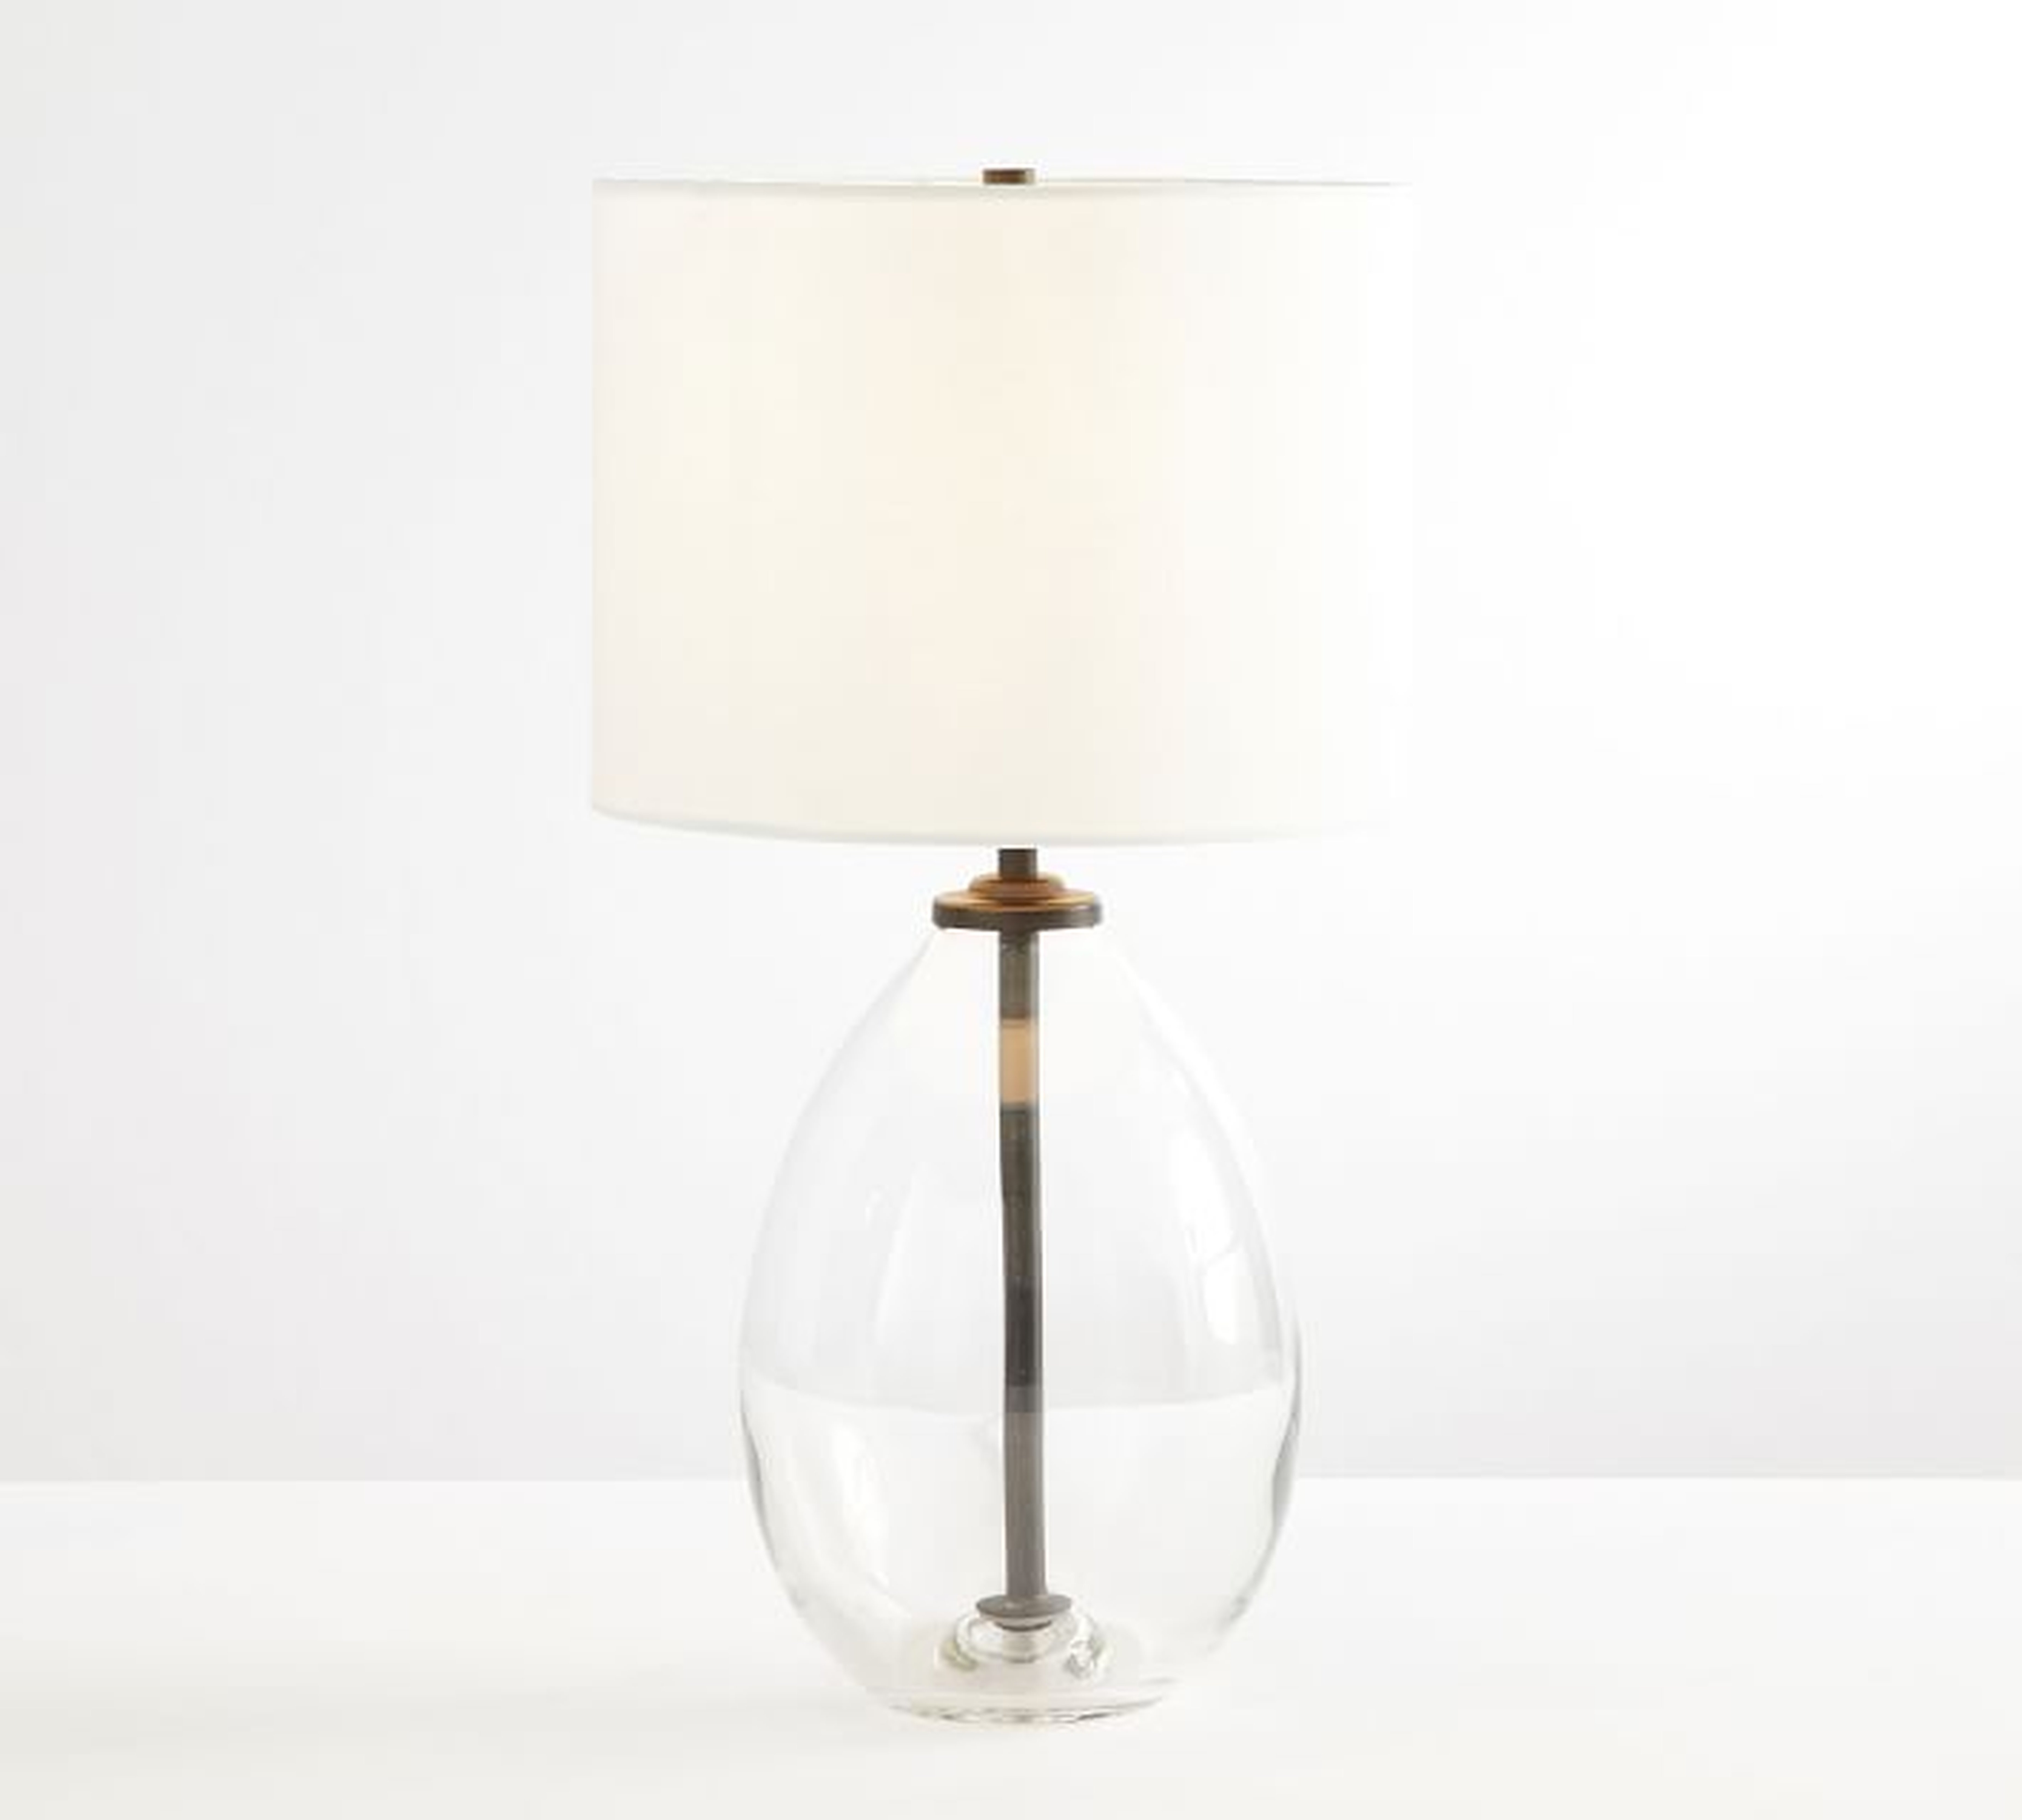 Bennett Recycled Glass Table Lamp, Bronze, Small - Pottery Barn